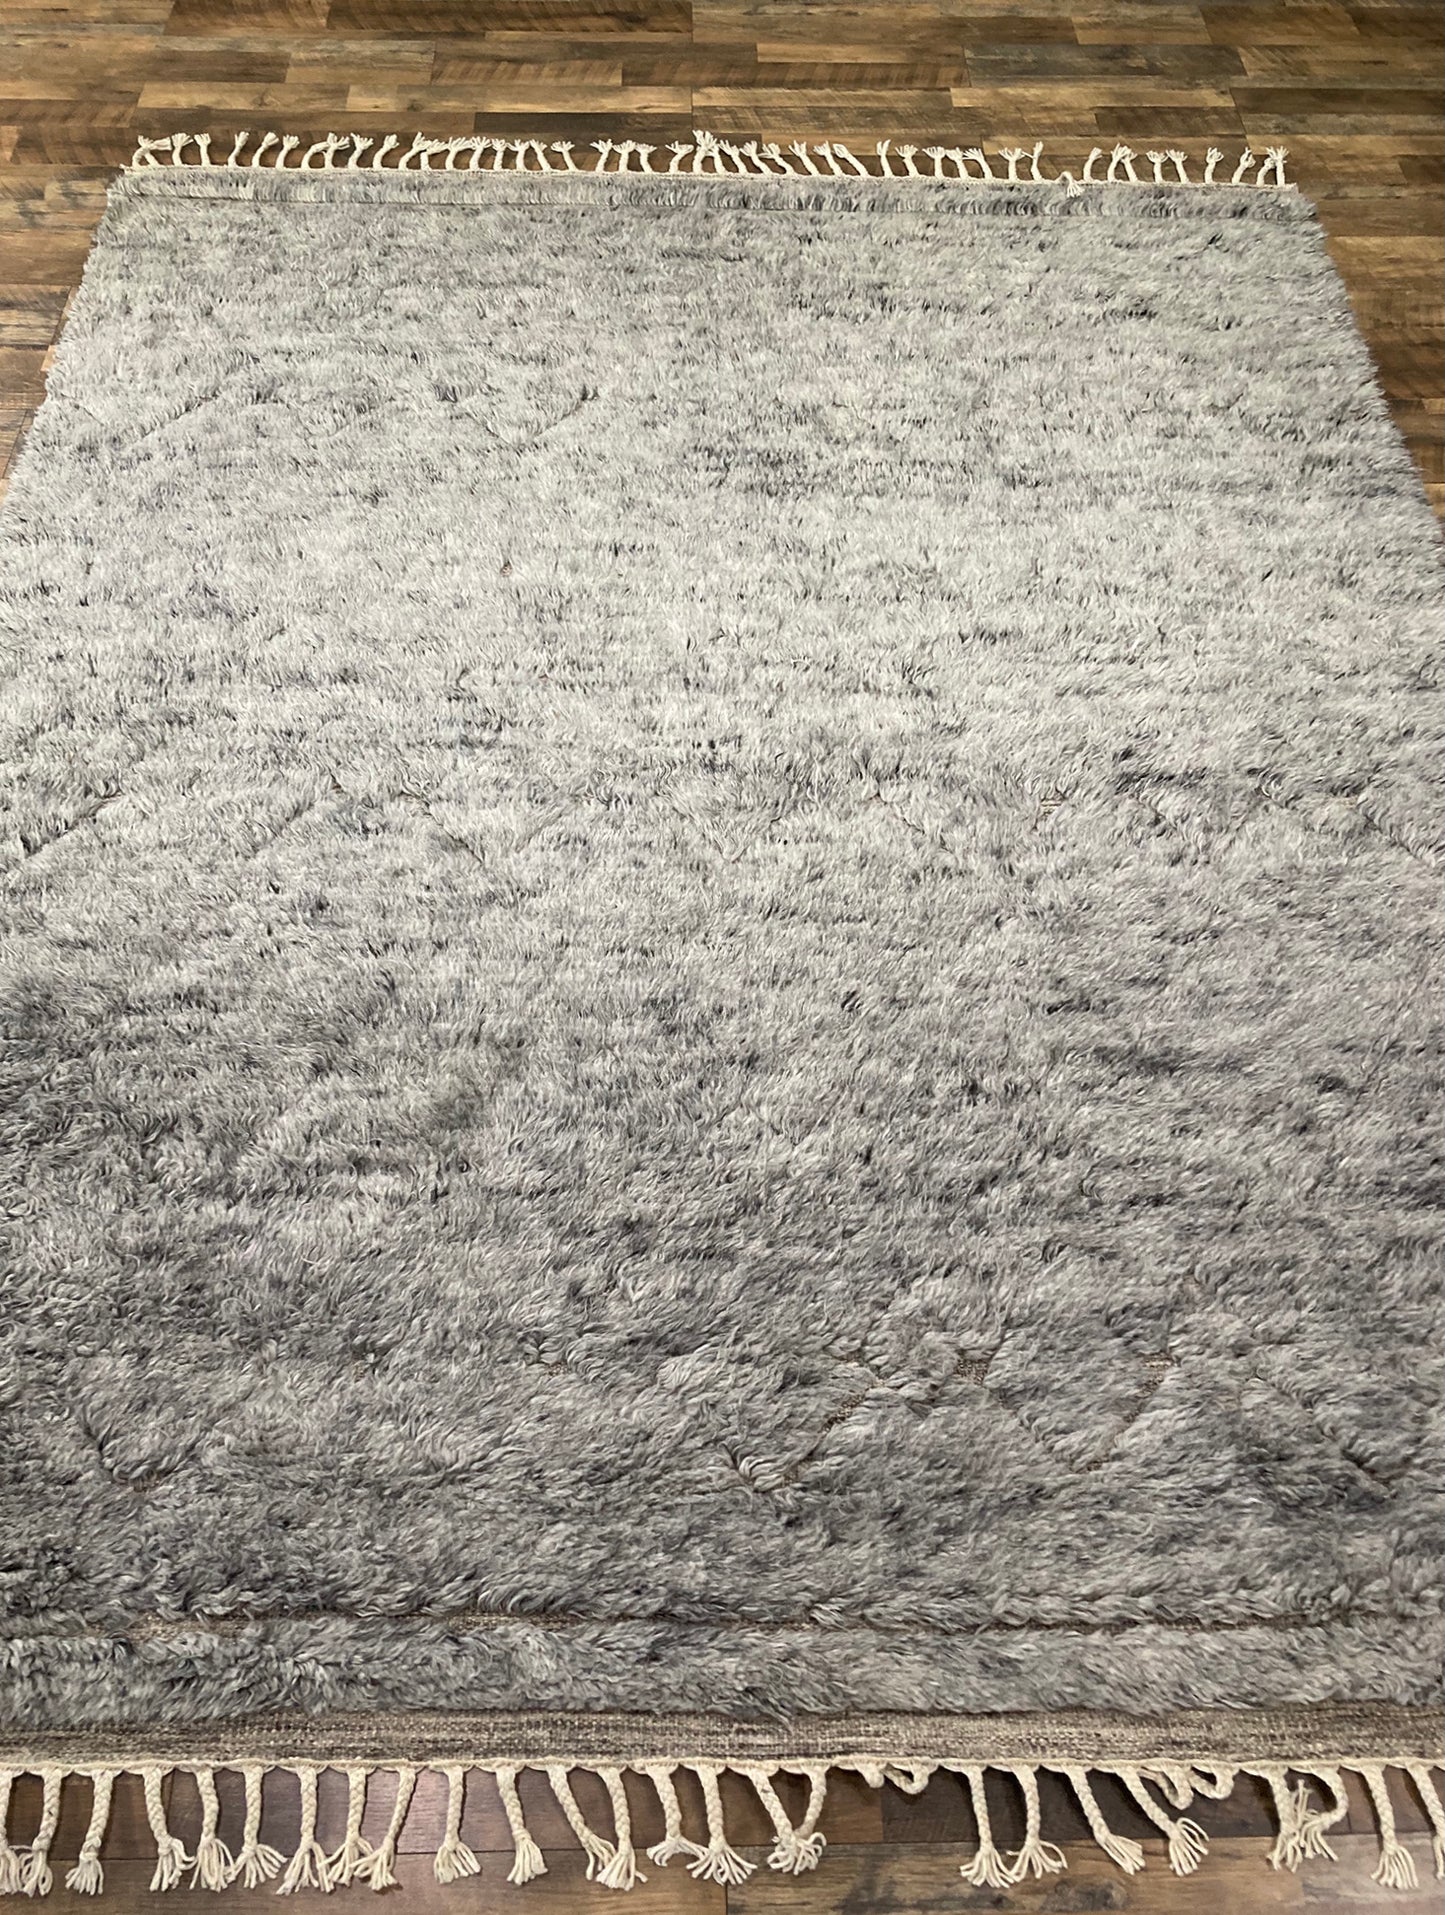 tangiers moroccan wool hand woven area rug gray textured soft shag moroccan rug online rug store affordable area rug handmade carpets online refined carpet rugs flooring orange county california fountain valley california 92708